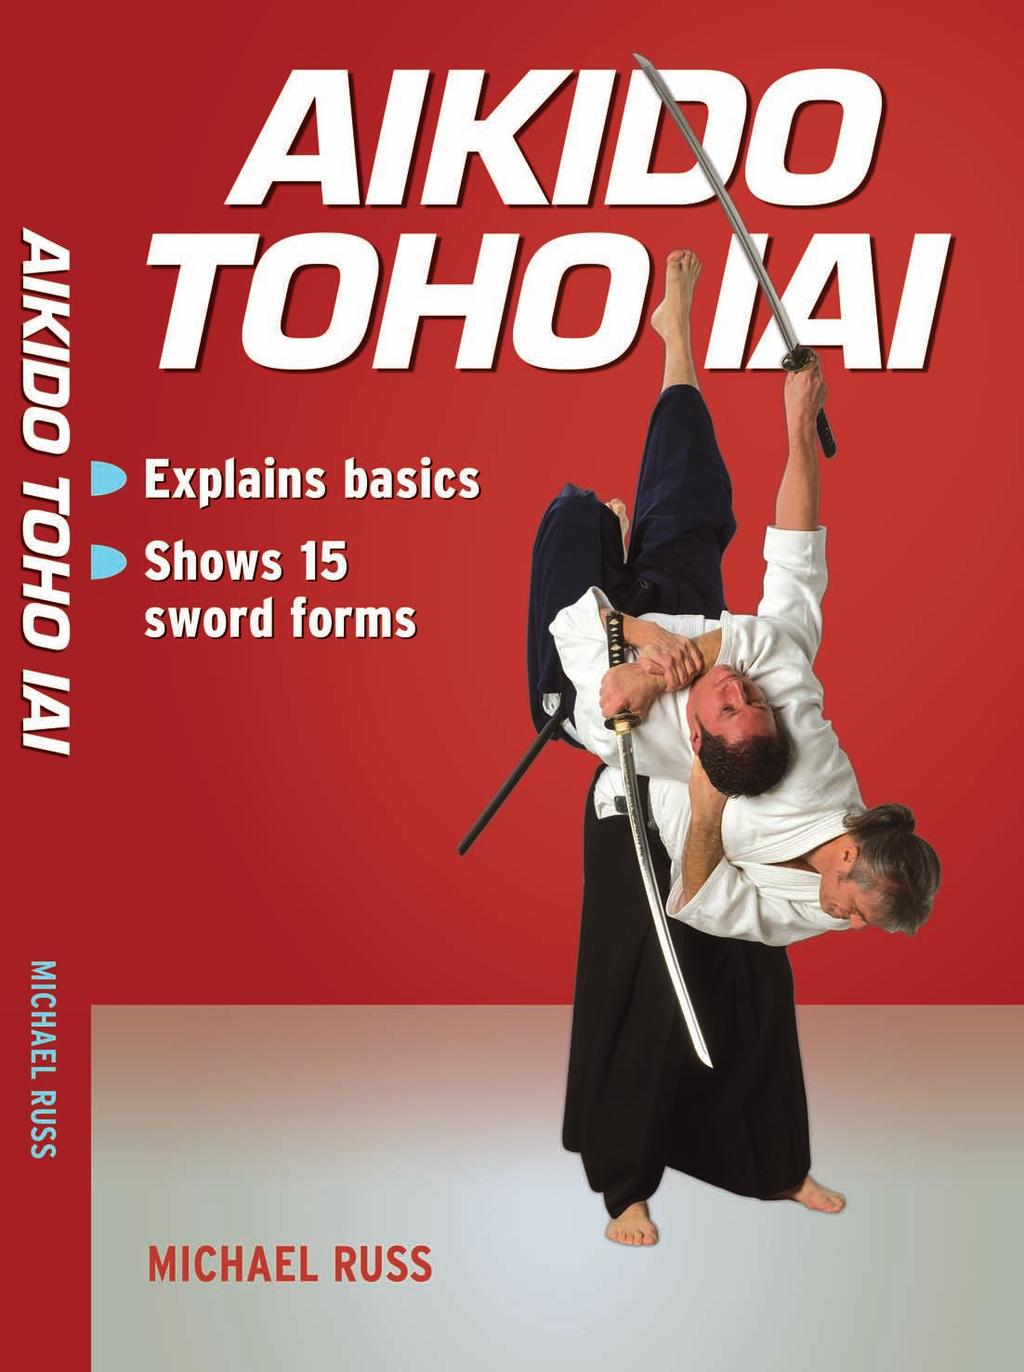 THE BOOK O Sensei Morihei Ueshiba, the founder of Aikido, often said to his students that training for Aikido without using the sword is not enough.